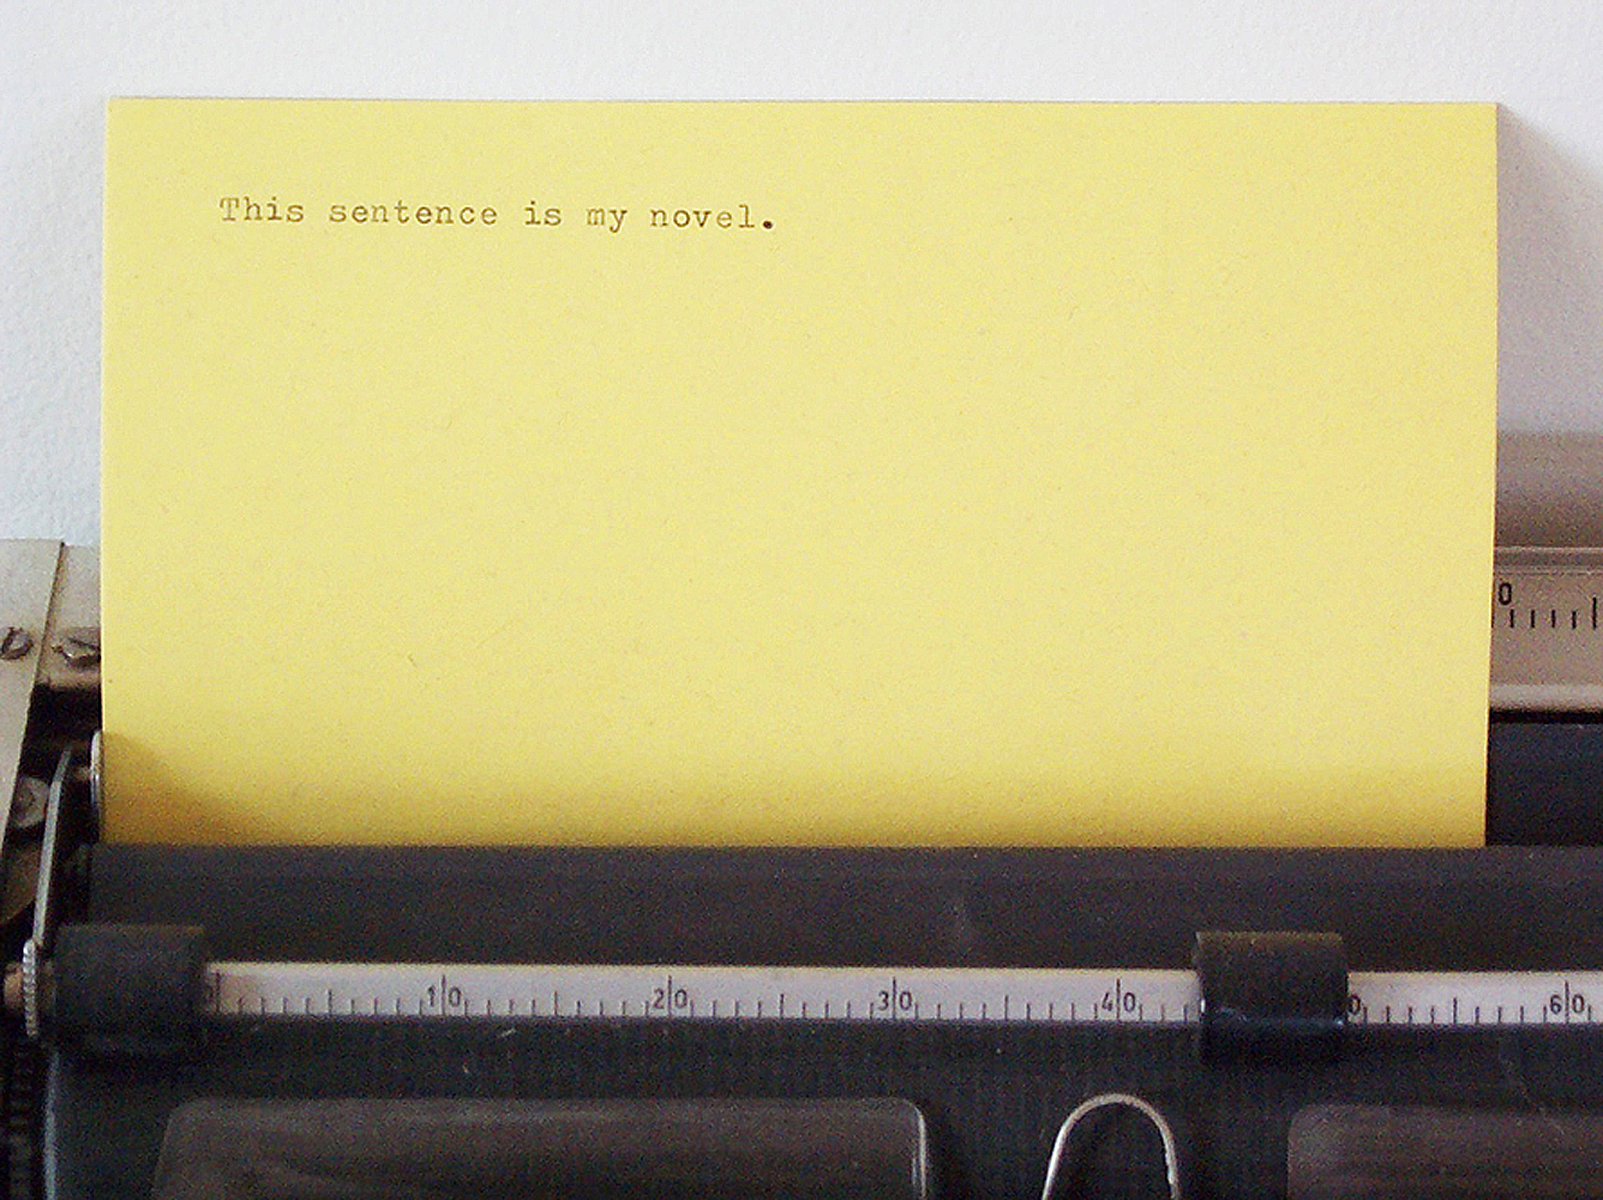 On a yellow card inserted in a typewriter is typed, “This sentence is my novel.”